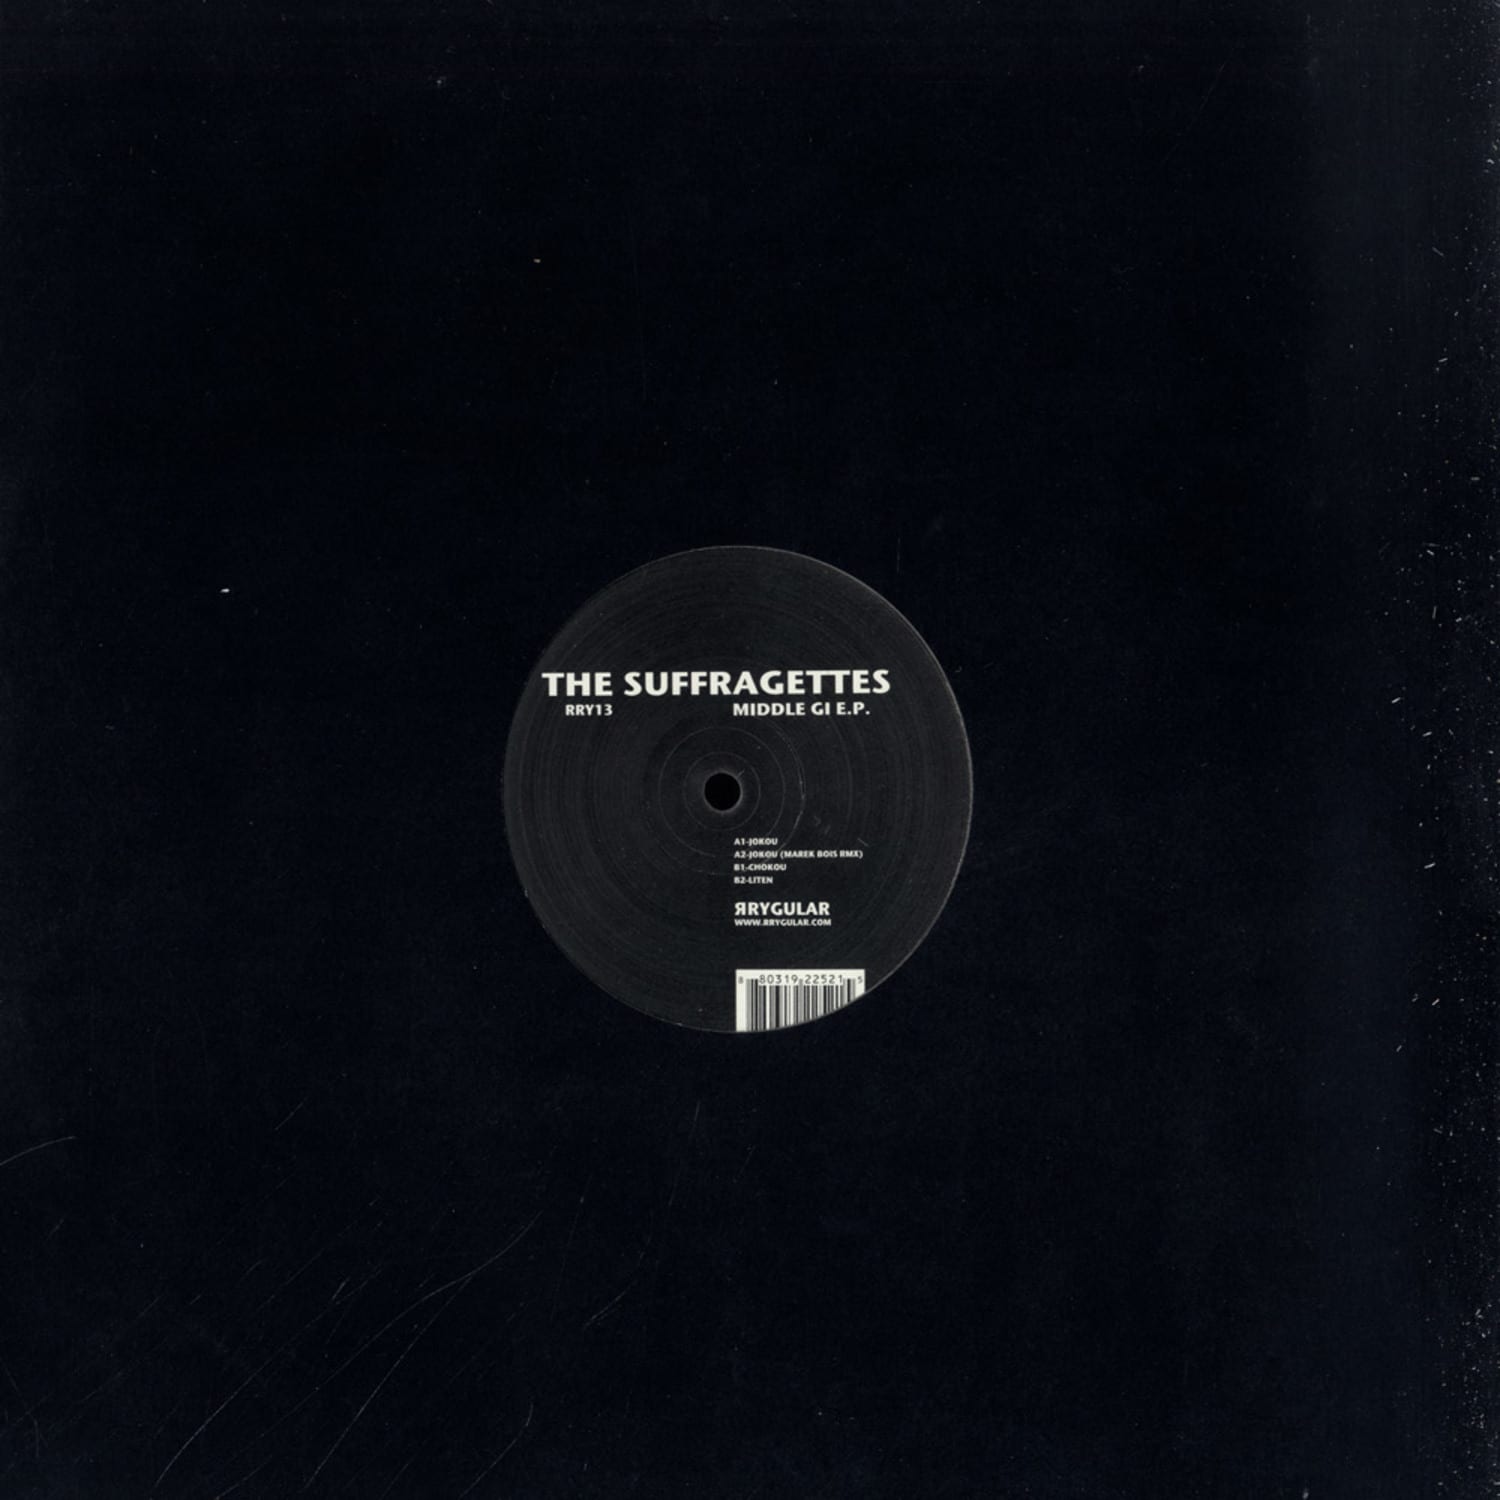 The Suffragettes - MIDDLE GI EP